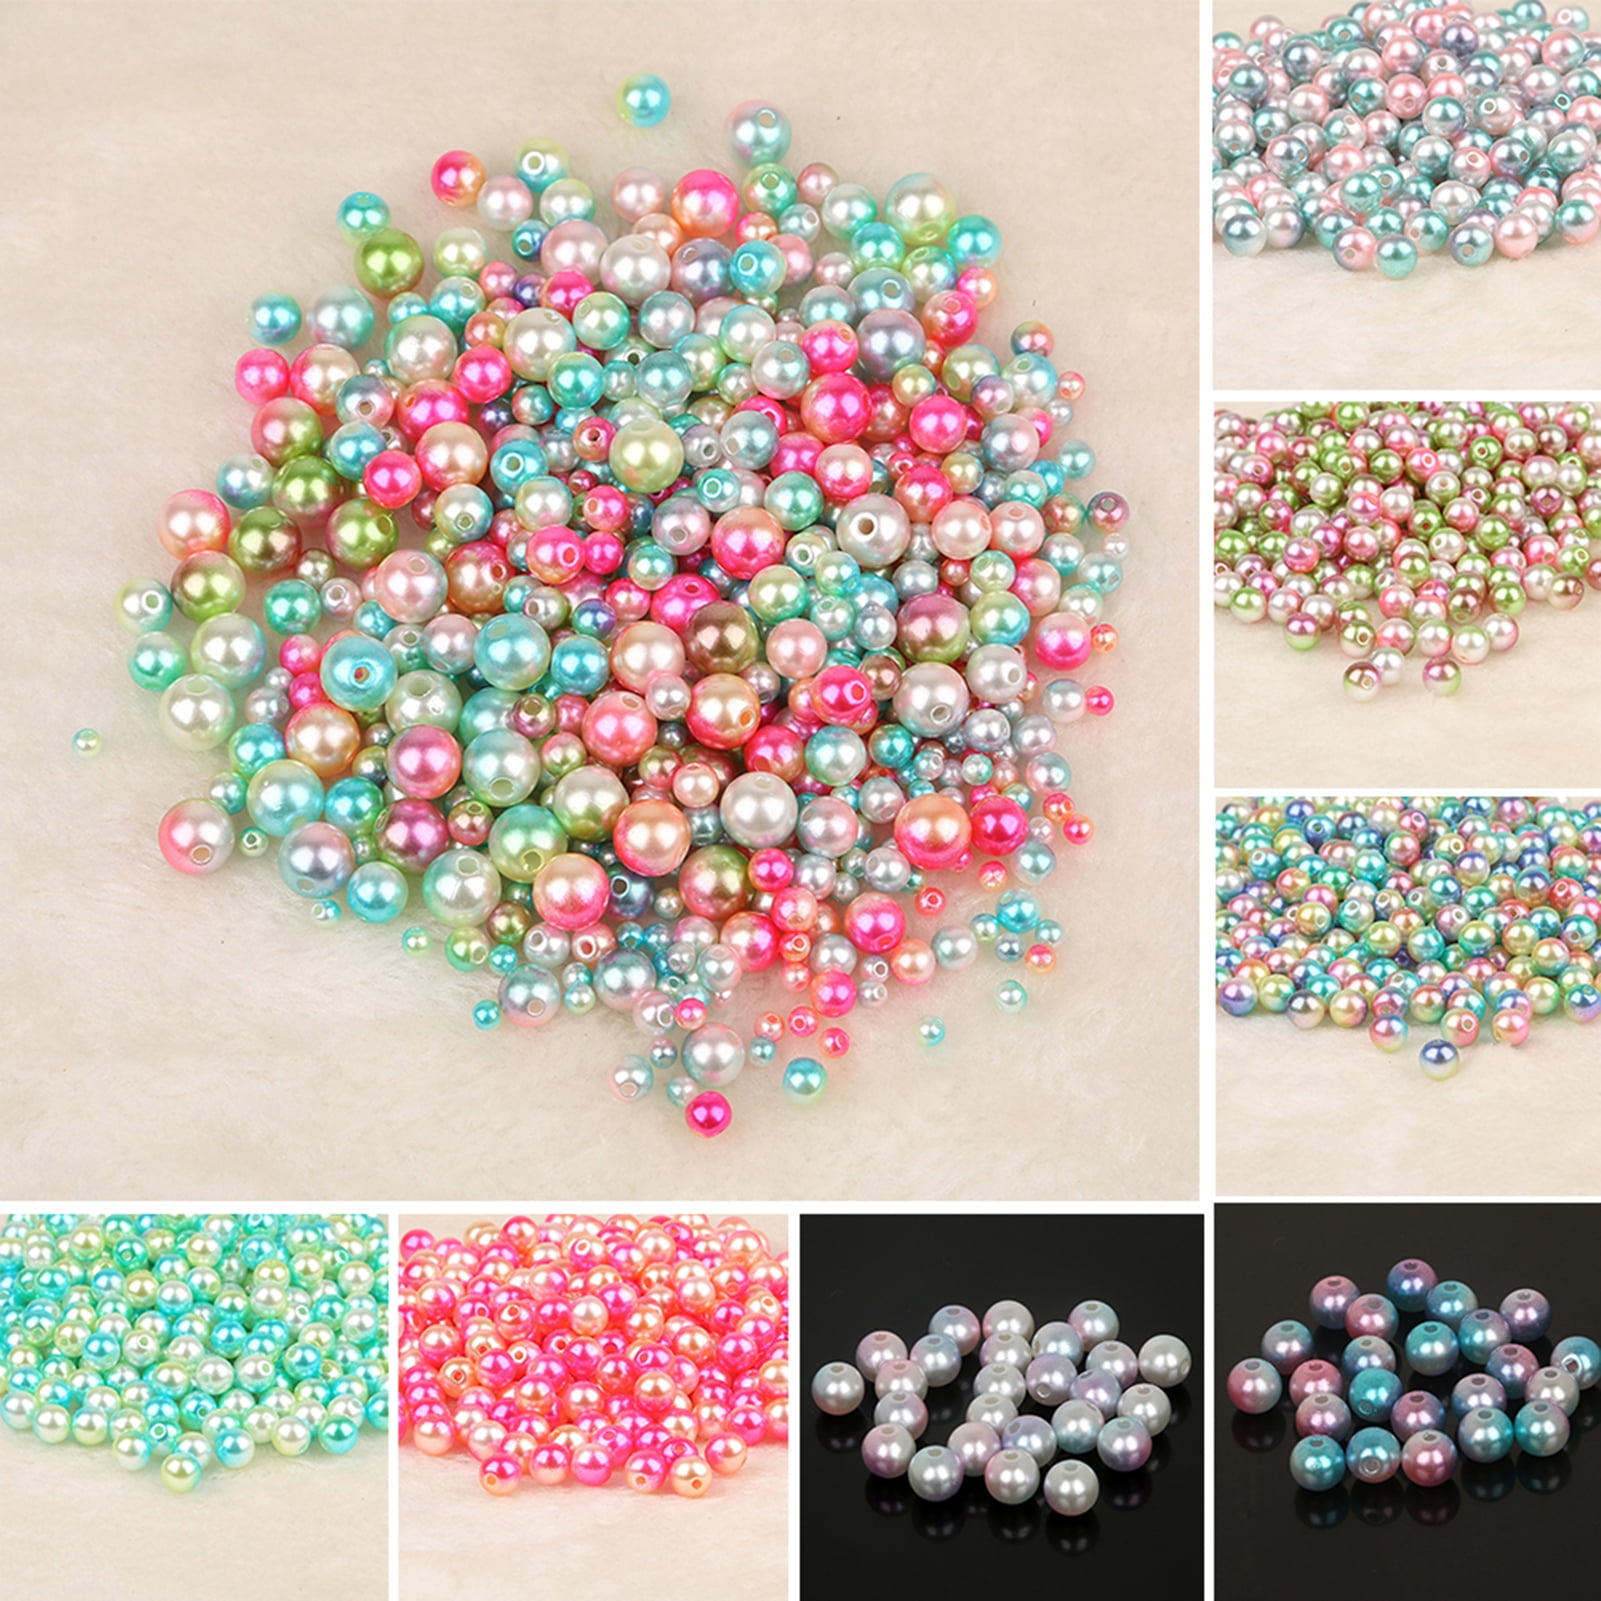 100Pcs-4/6/8/10Mm Faux Pearl Beads Diy Crafts Sewing Jewelry Wedding Decorations 